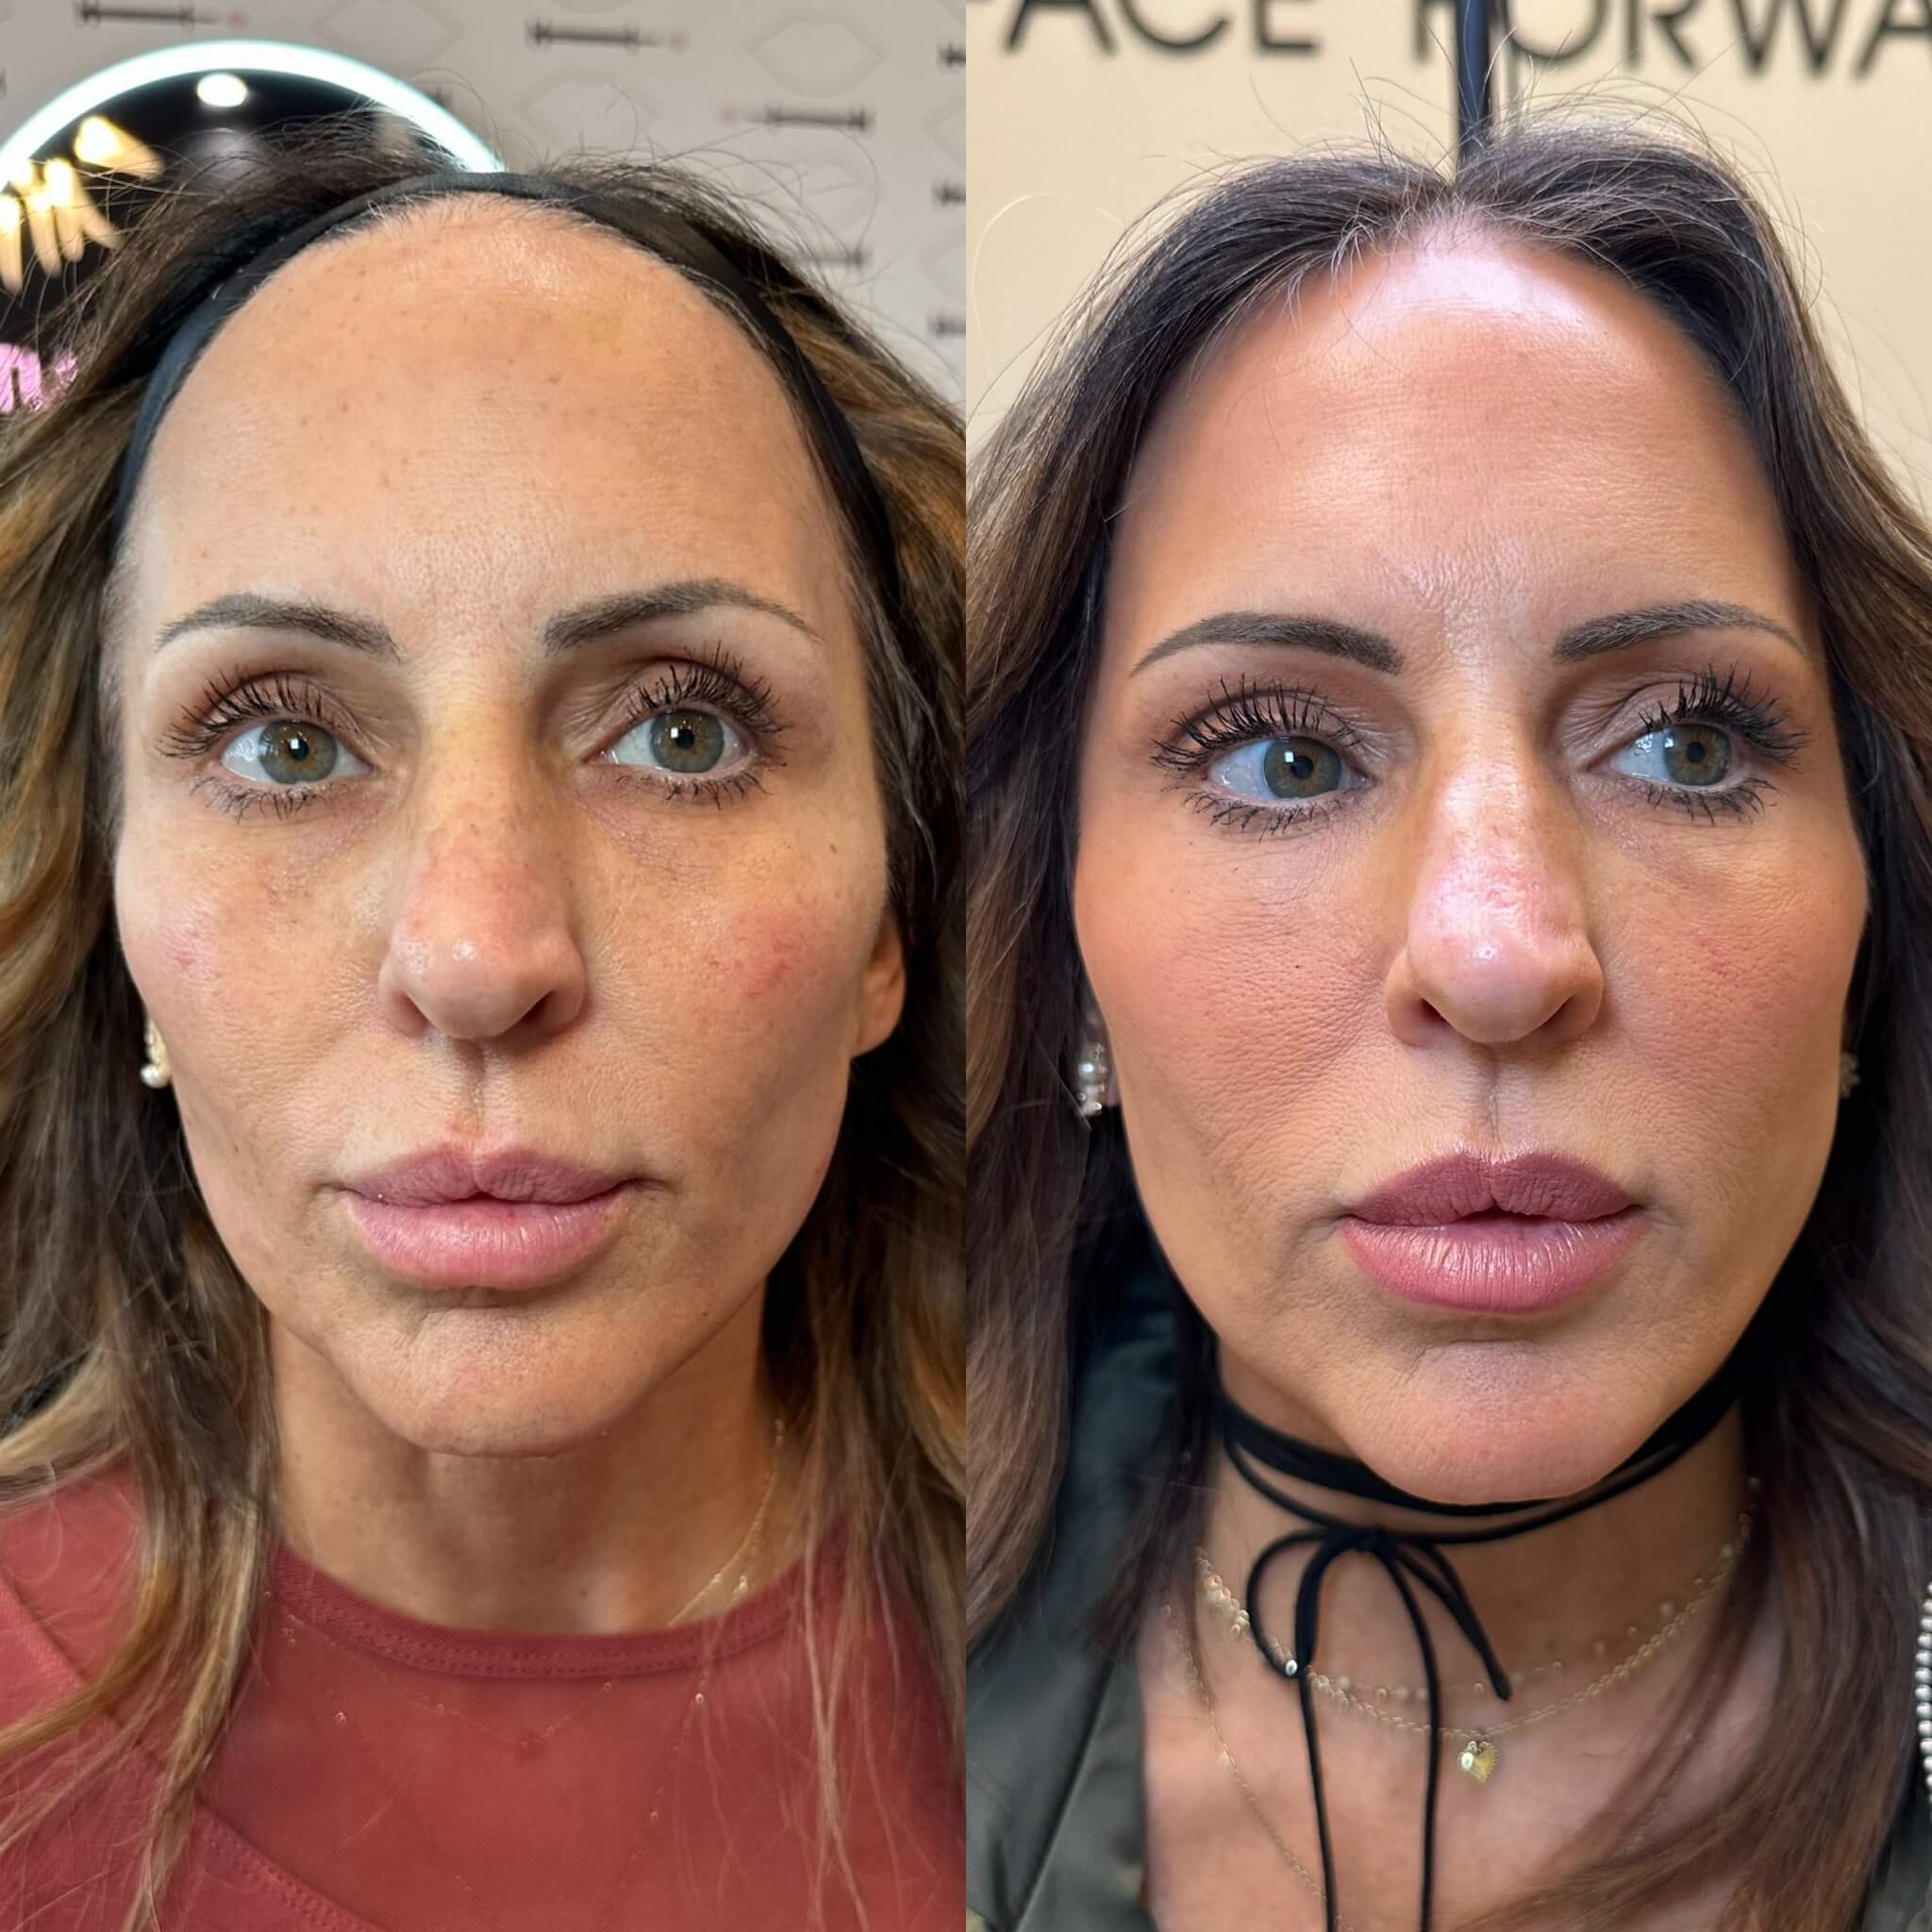  aesthetic treatments before and after photo